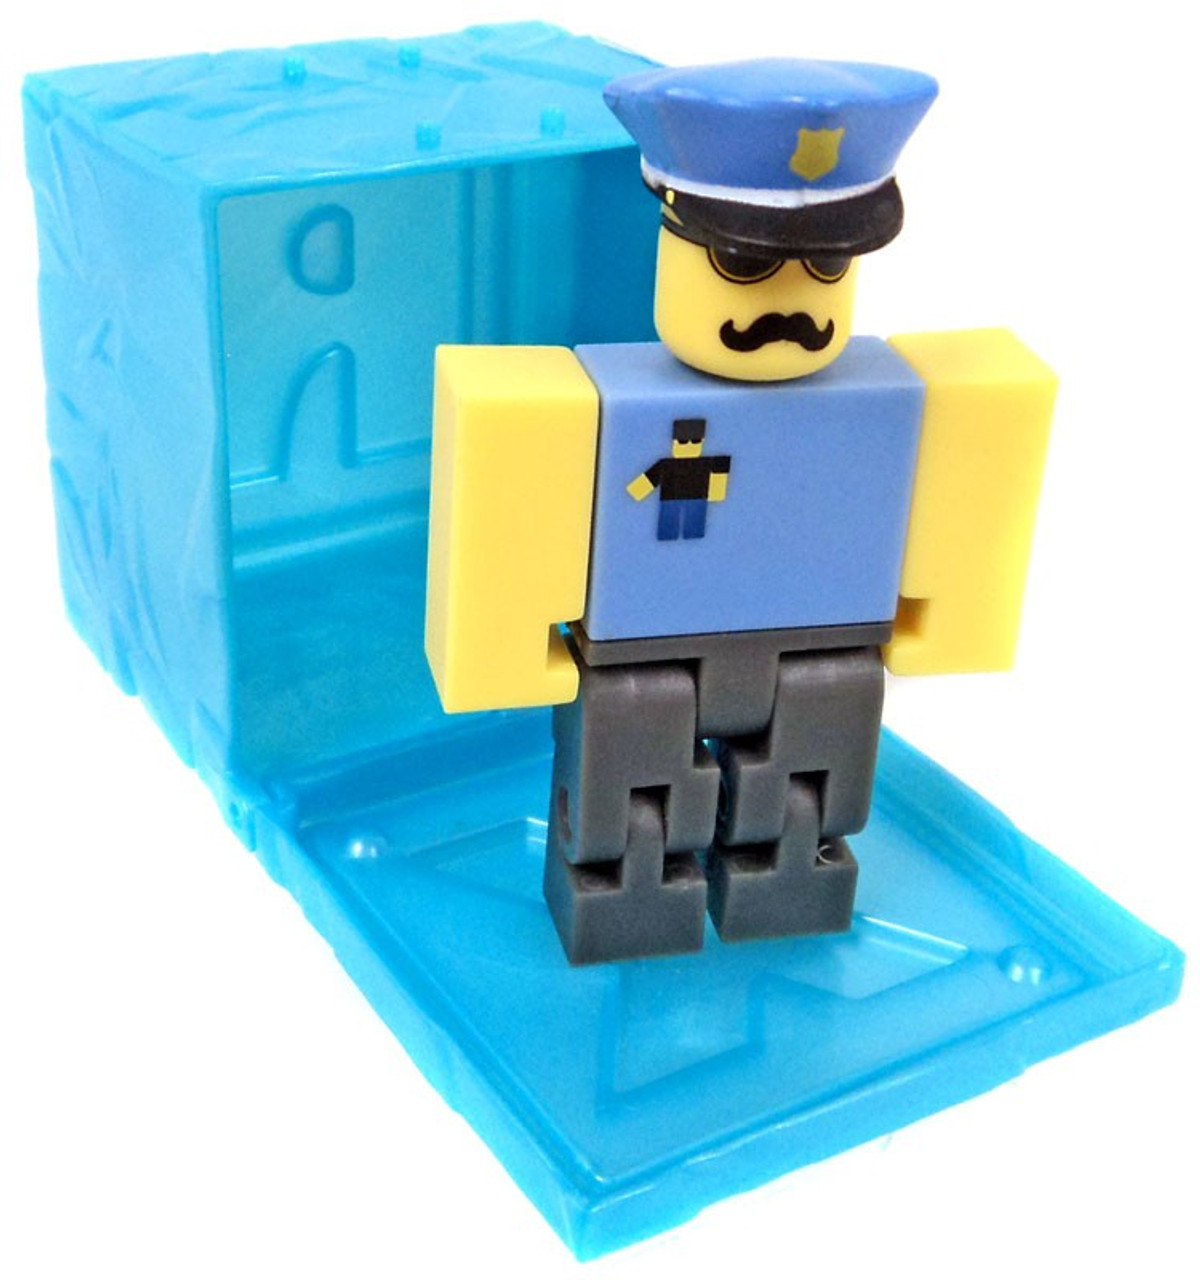 Roblox Red Series 3 Retail Tycoon Rent A Cop 3 Mini Figure Blue Cube With Online Code Loose Jazwares Toywiz - roblox games like retail tycoon